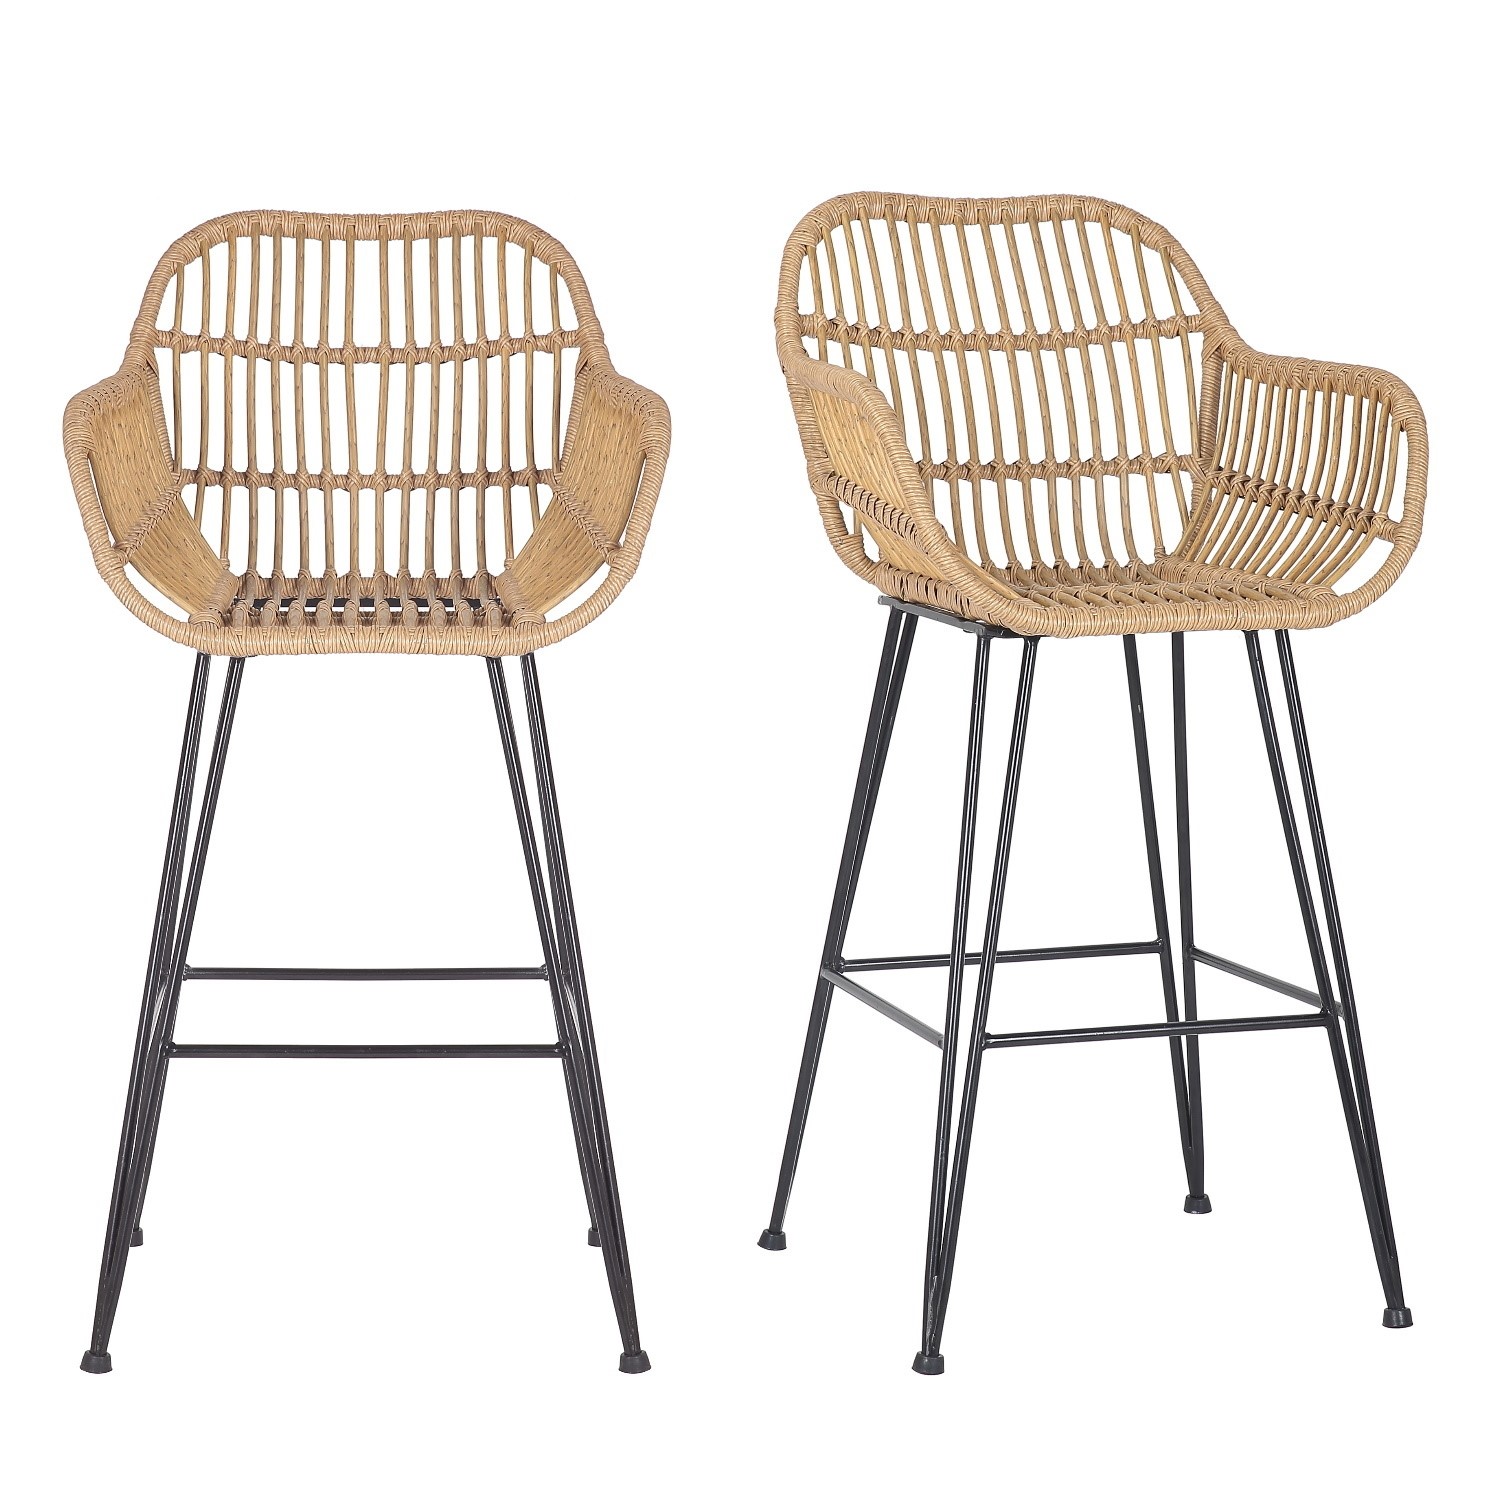 Set of 2 Brown Rattan Effect Bar Stools with Backs - 75 cm - Fion ...